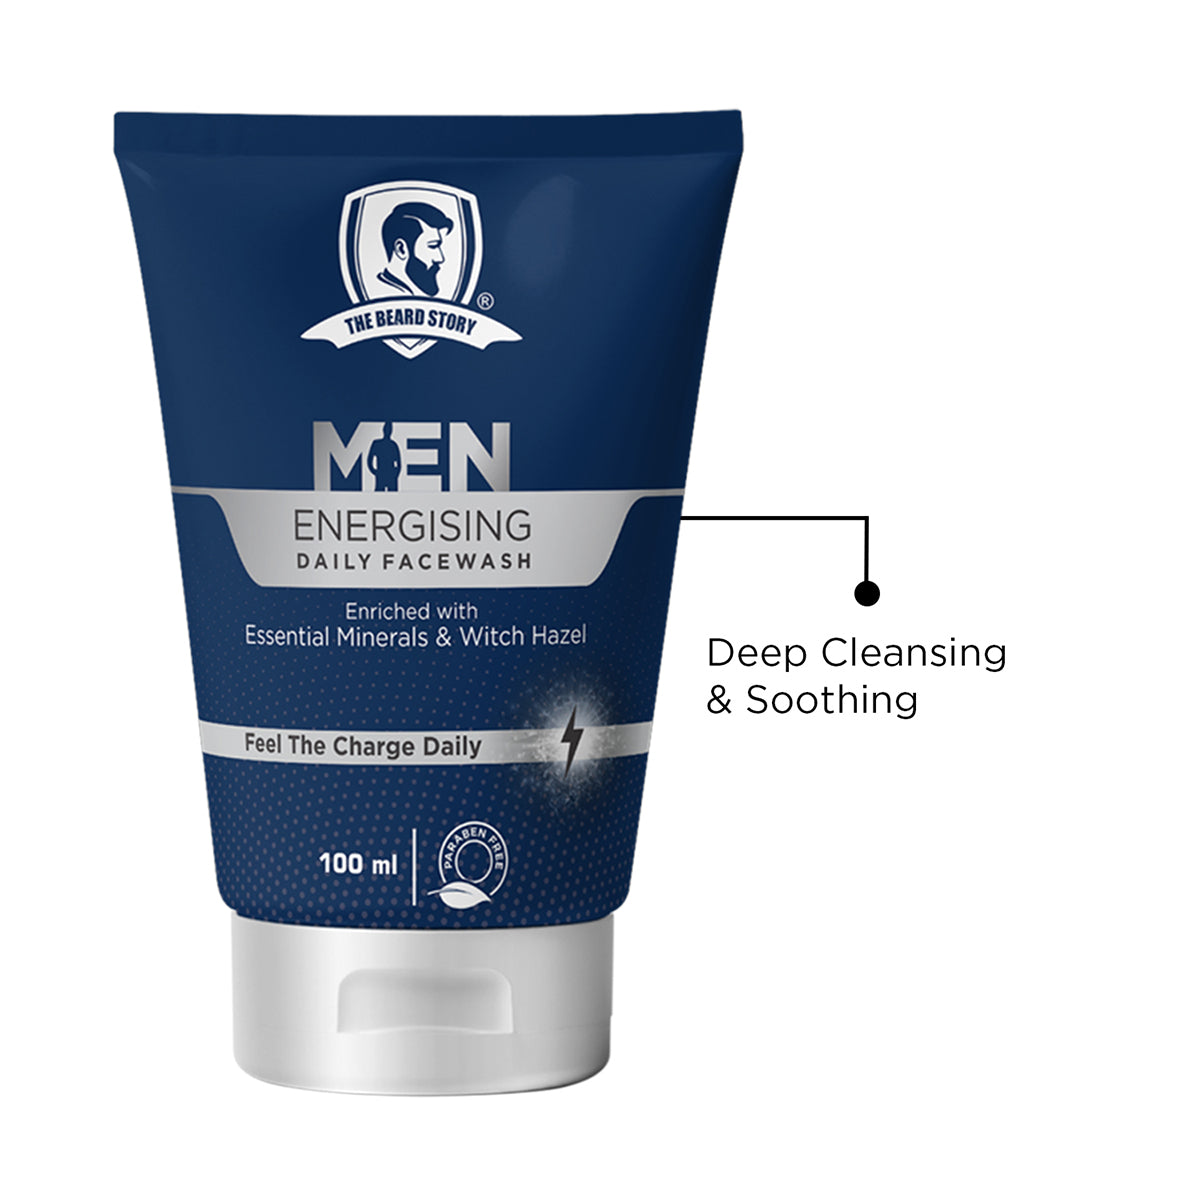 The Beard Story Daily Cleansing Facewash | For Men | Enriched with Minerals | 100g